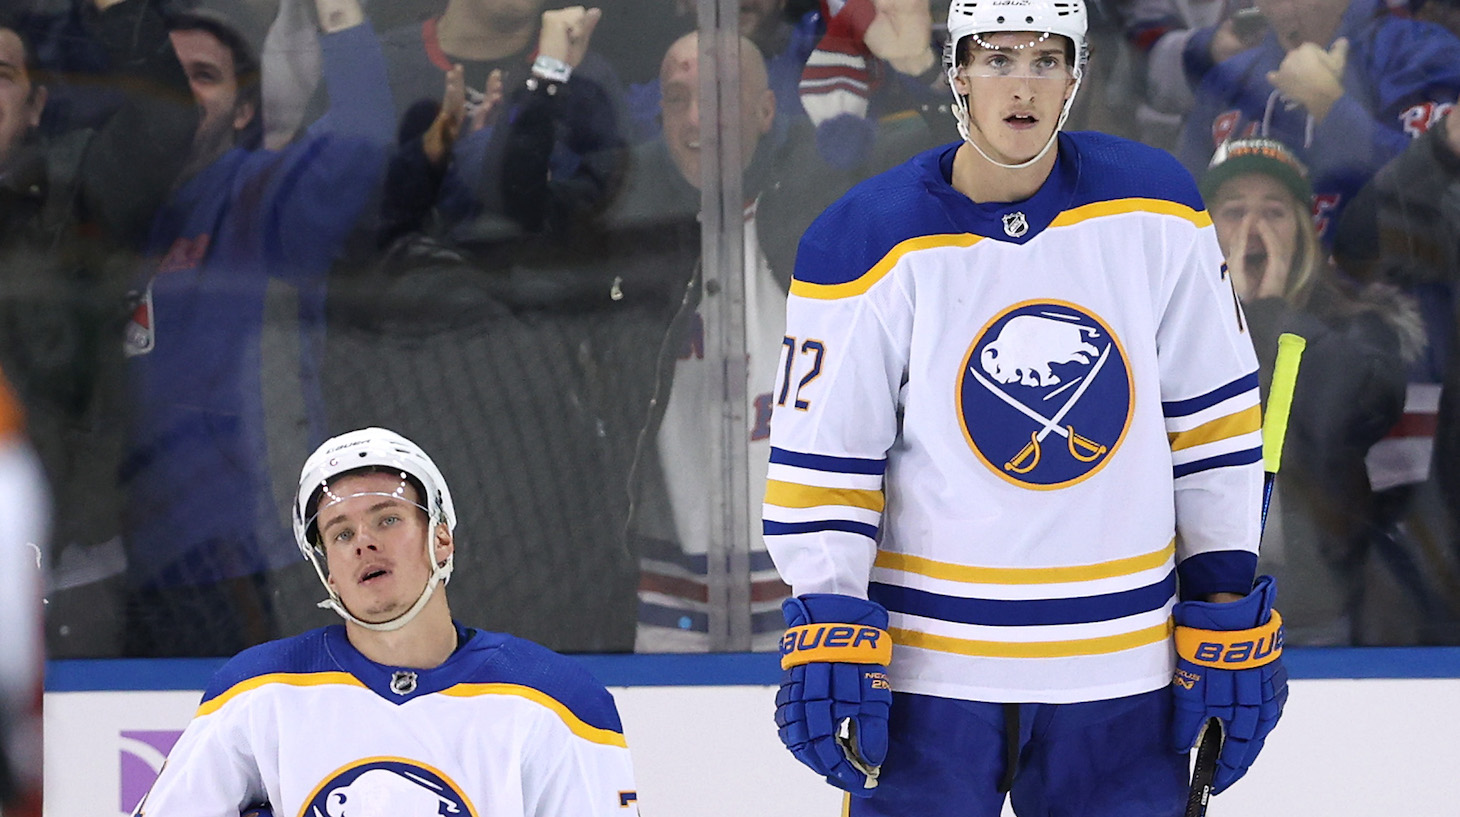 NEW YORK, NEW YORK - NOVEMBER 21: Victor Olofsson #71 and Tage Thompson of the Buffalo Sabres react to the loss to the New York Rangers at Madison Square Garden on November 21, 2021 in New York City. The New York Rangers defeated the Buffalo Sabres 5-4. (Photo by Elsa/Getty Images)